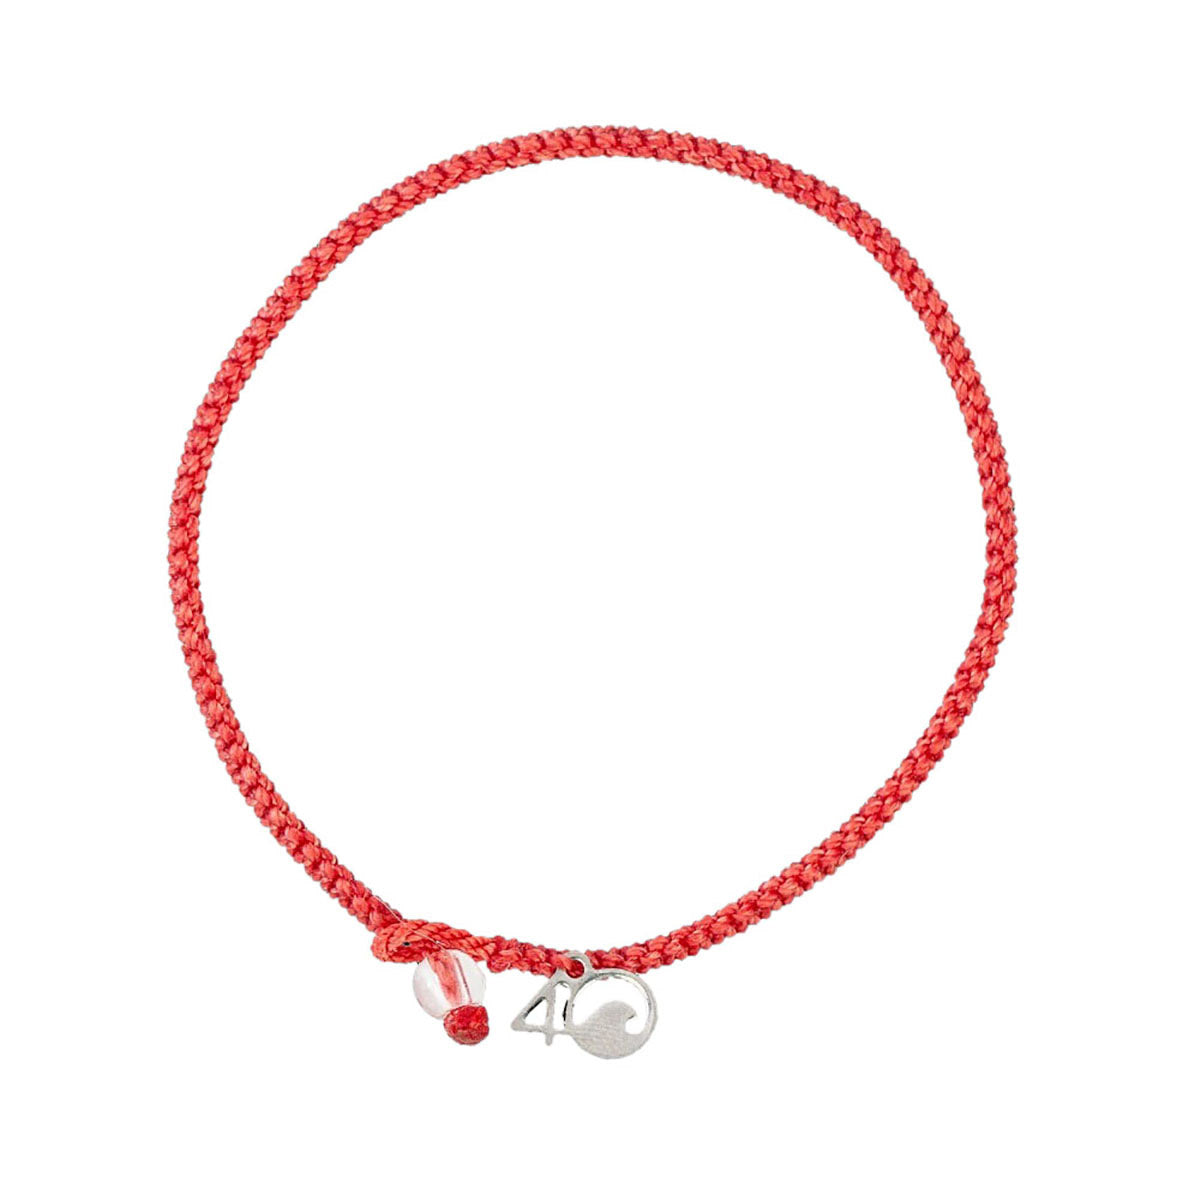 4Ocean Coral Reef Braided Bracelet with a silver charm and adjustable knot closure, made from recycled plastic bottles.